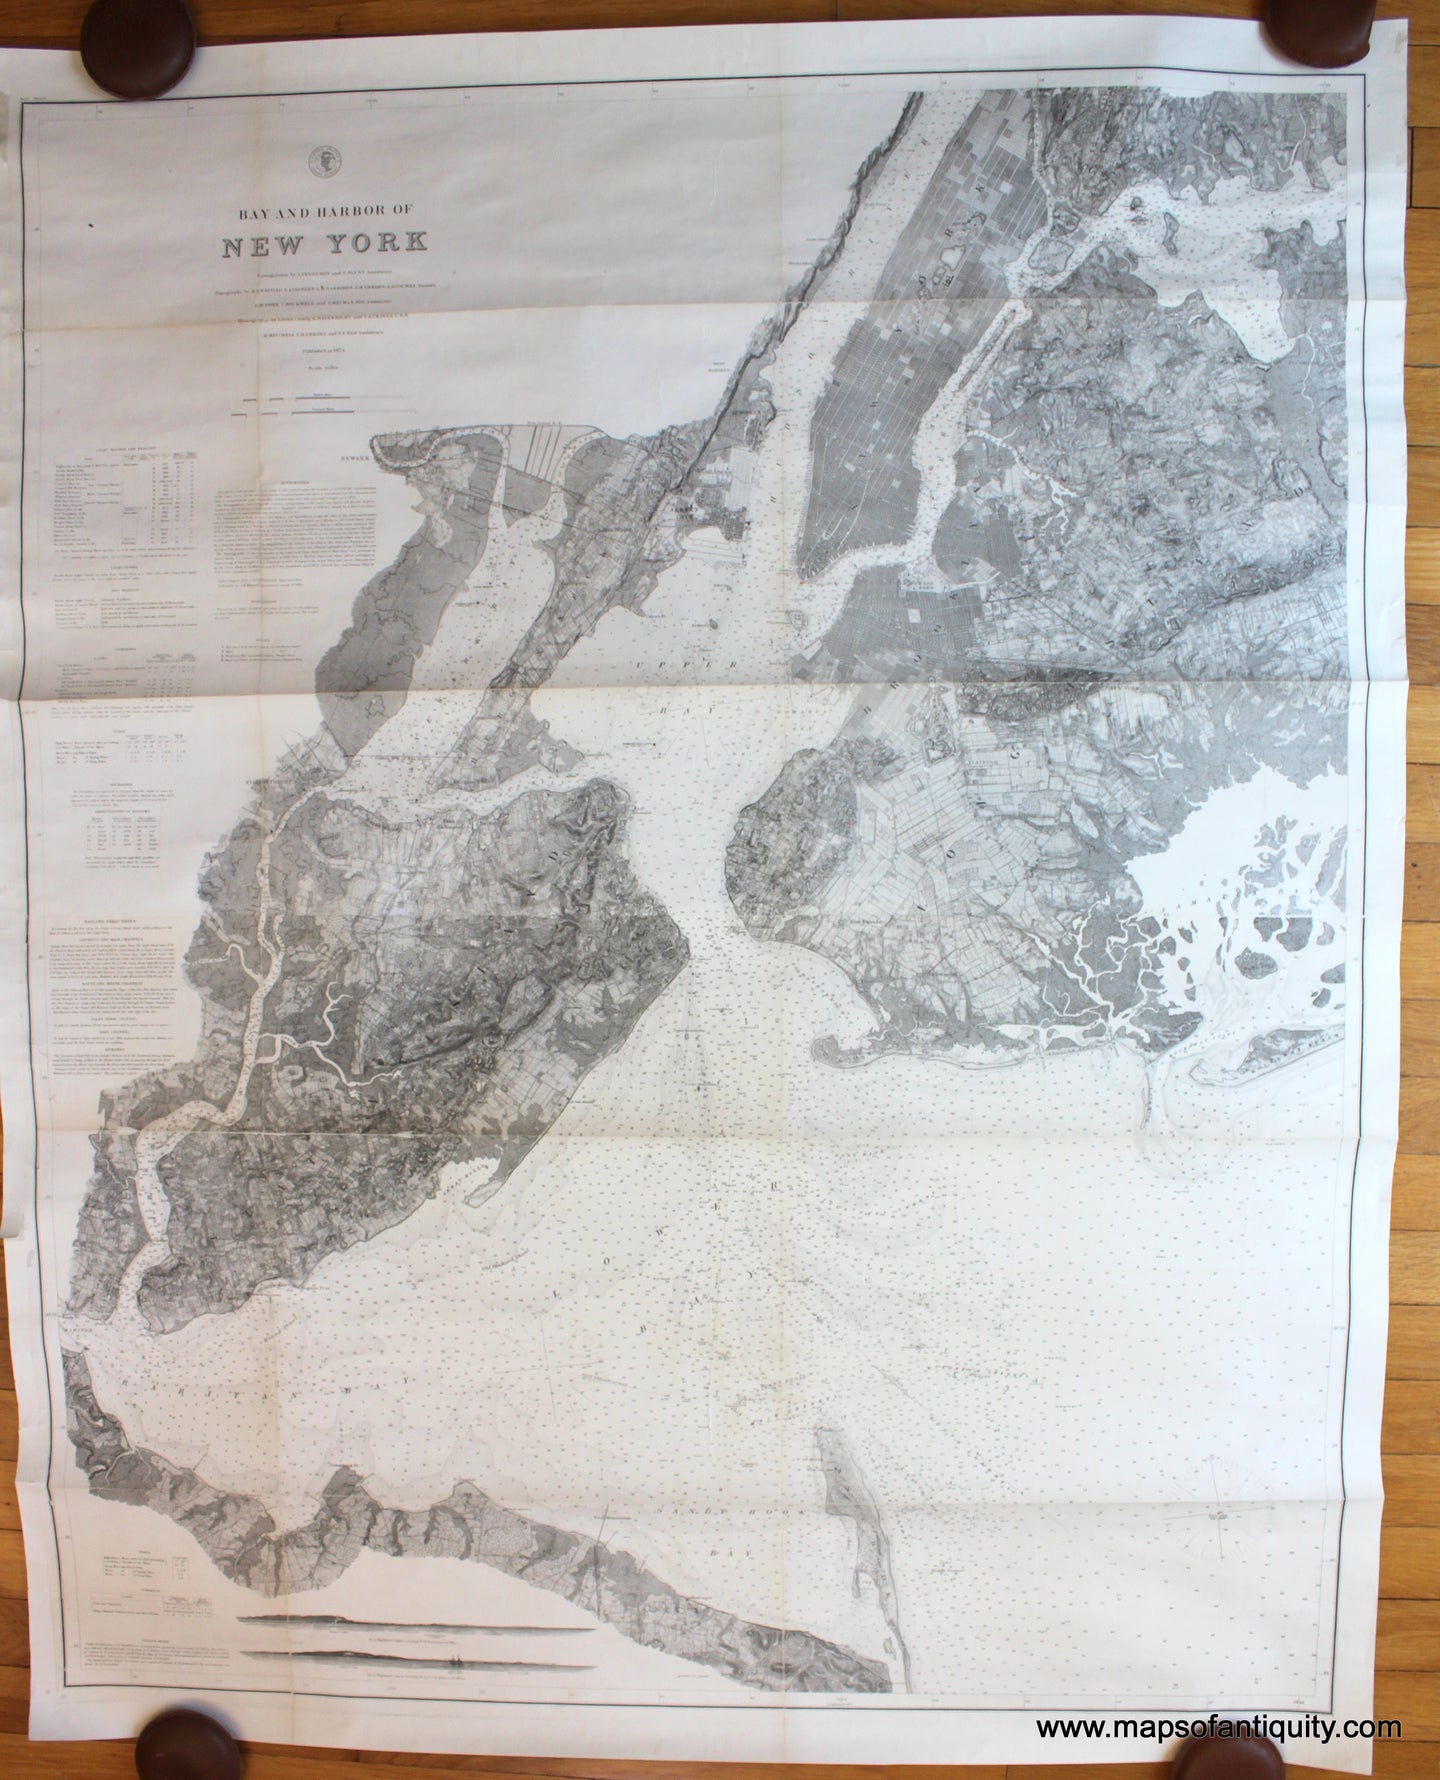 Antique-Nautical-Chart-Bay-and-Harbor-of-New-York-1874-USC&GS-1800s-19th-century-Maps-of-Antiquity